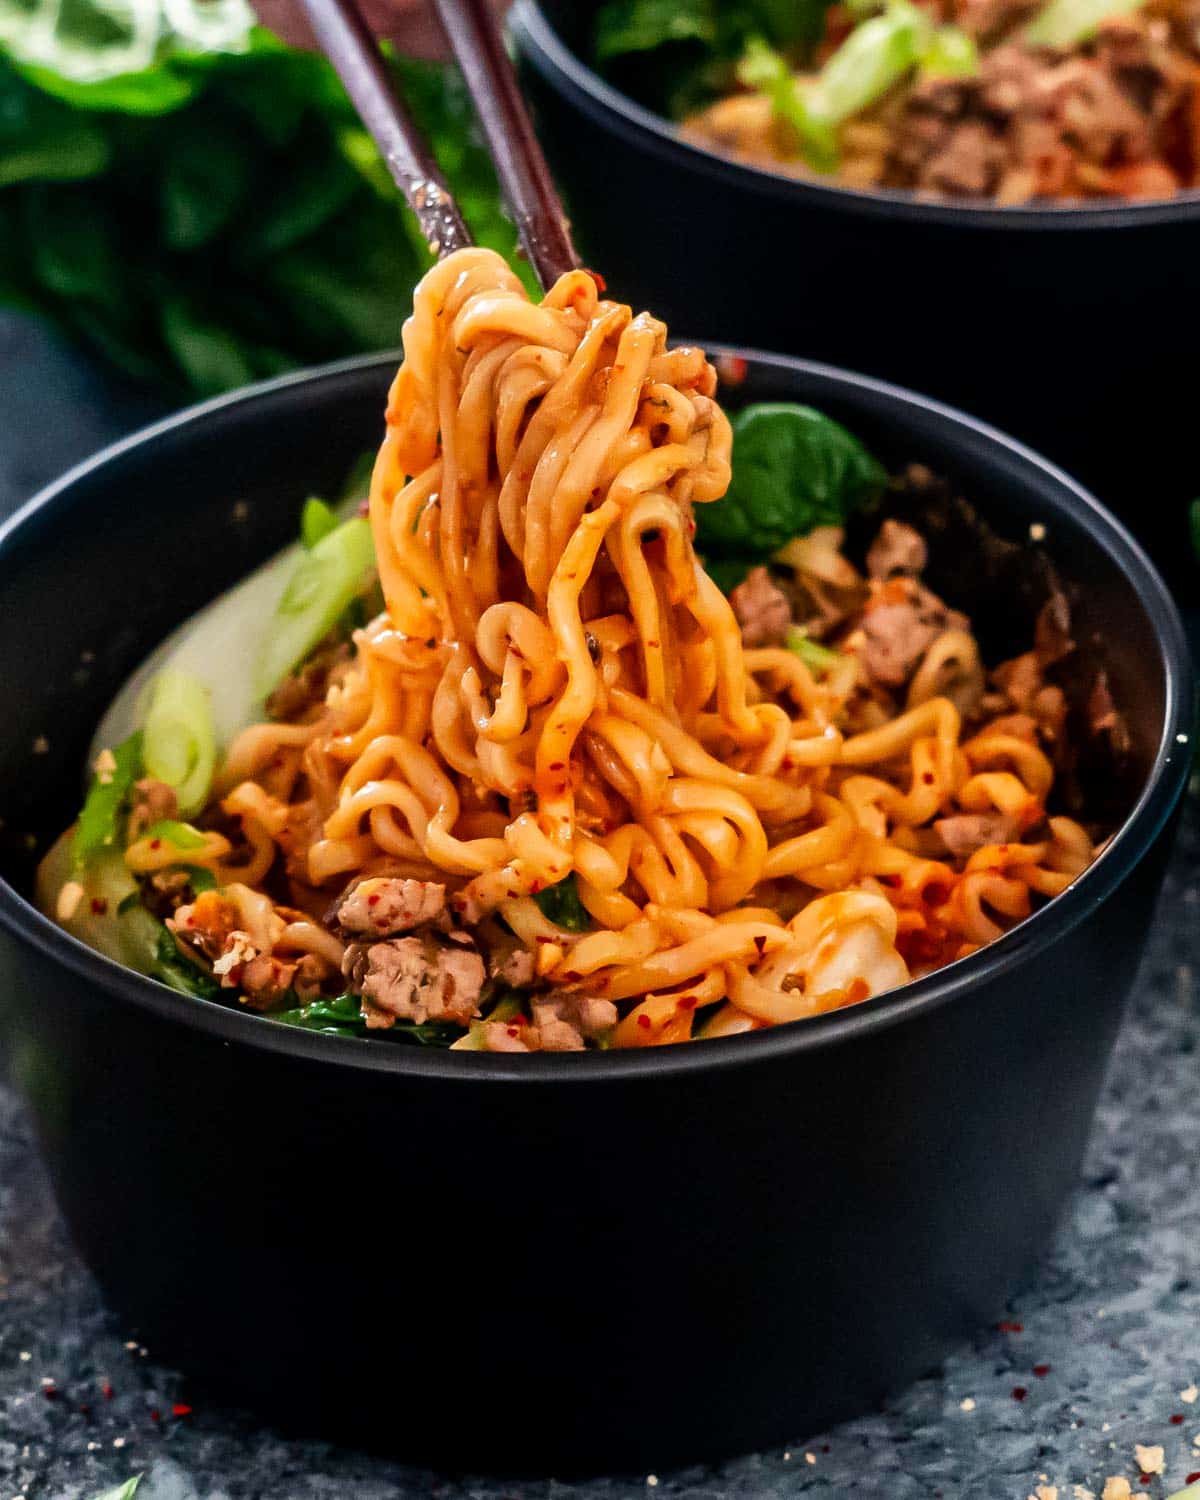 a pair of chop sticks lifting up some dan dan noodles from a bowl.